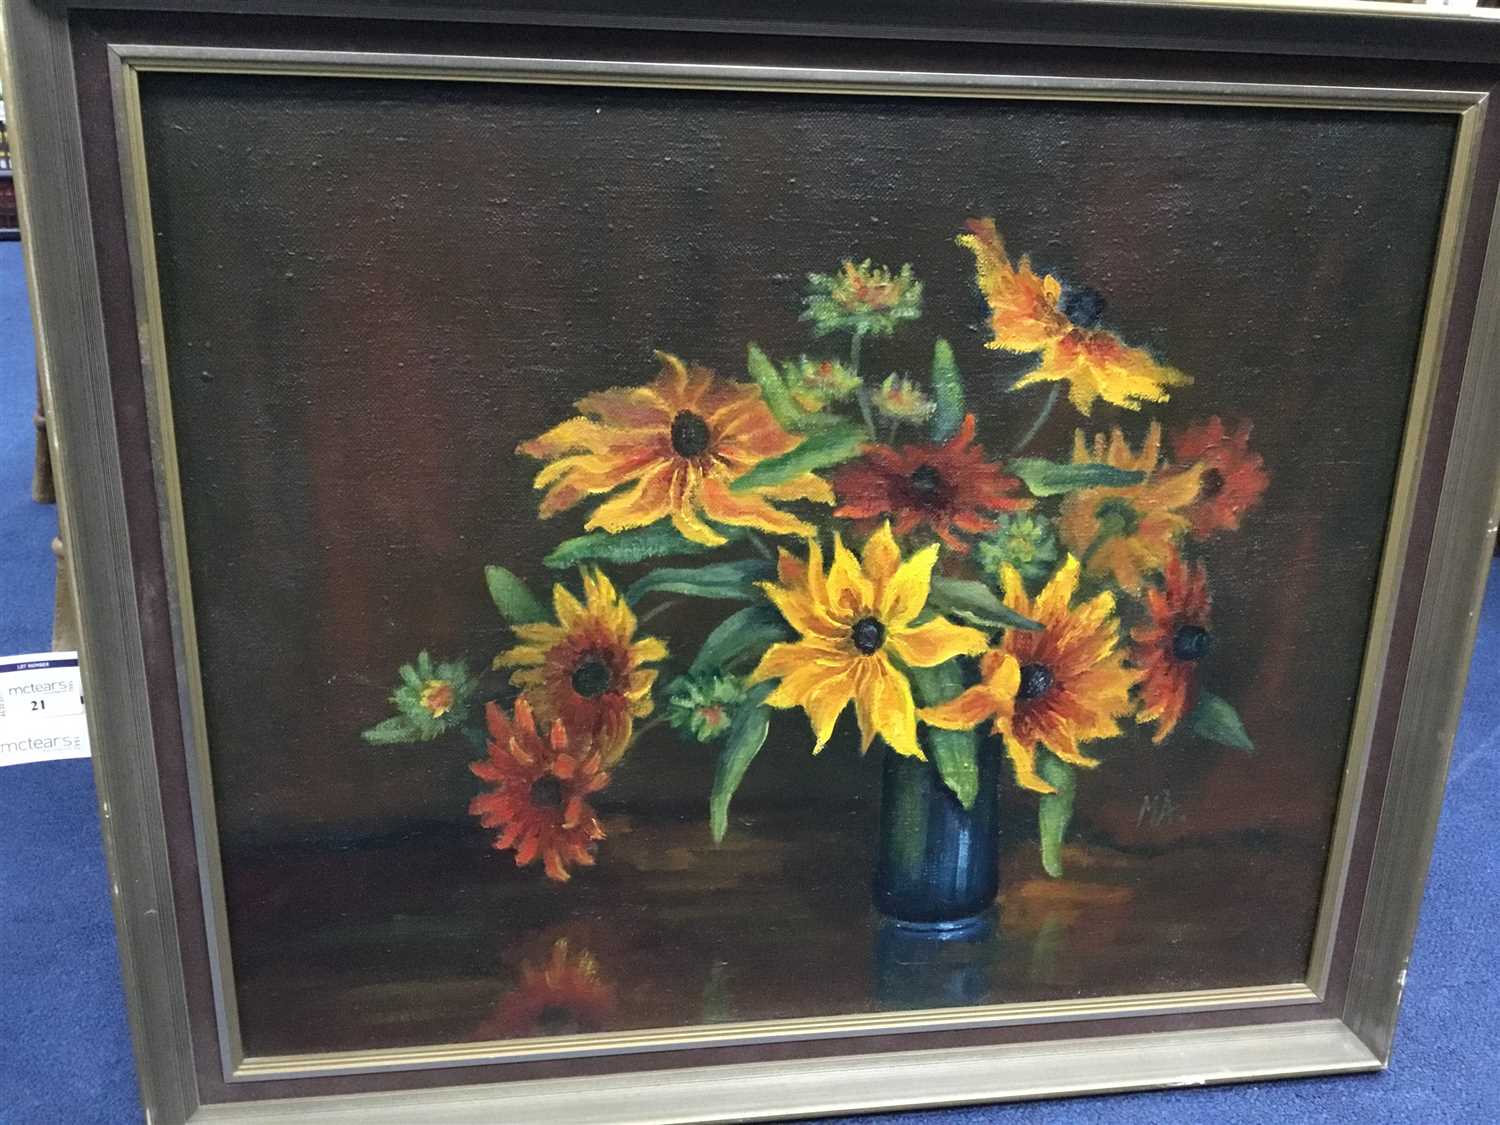 Lot 21 - RUBECKIA IN A VASE, AN OIL BY MARGARET AULD